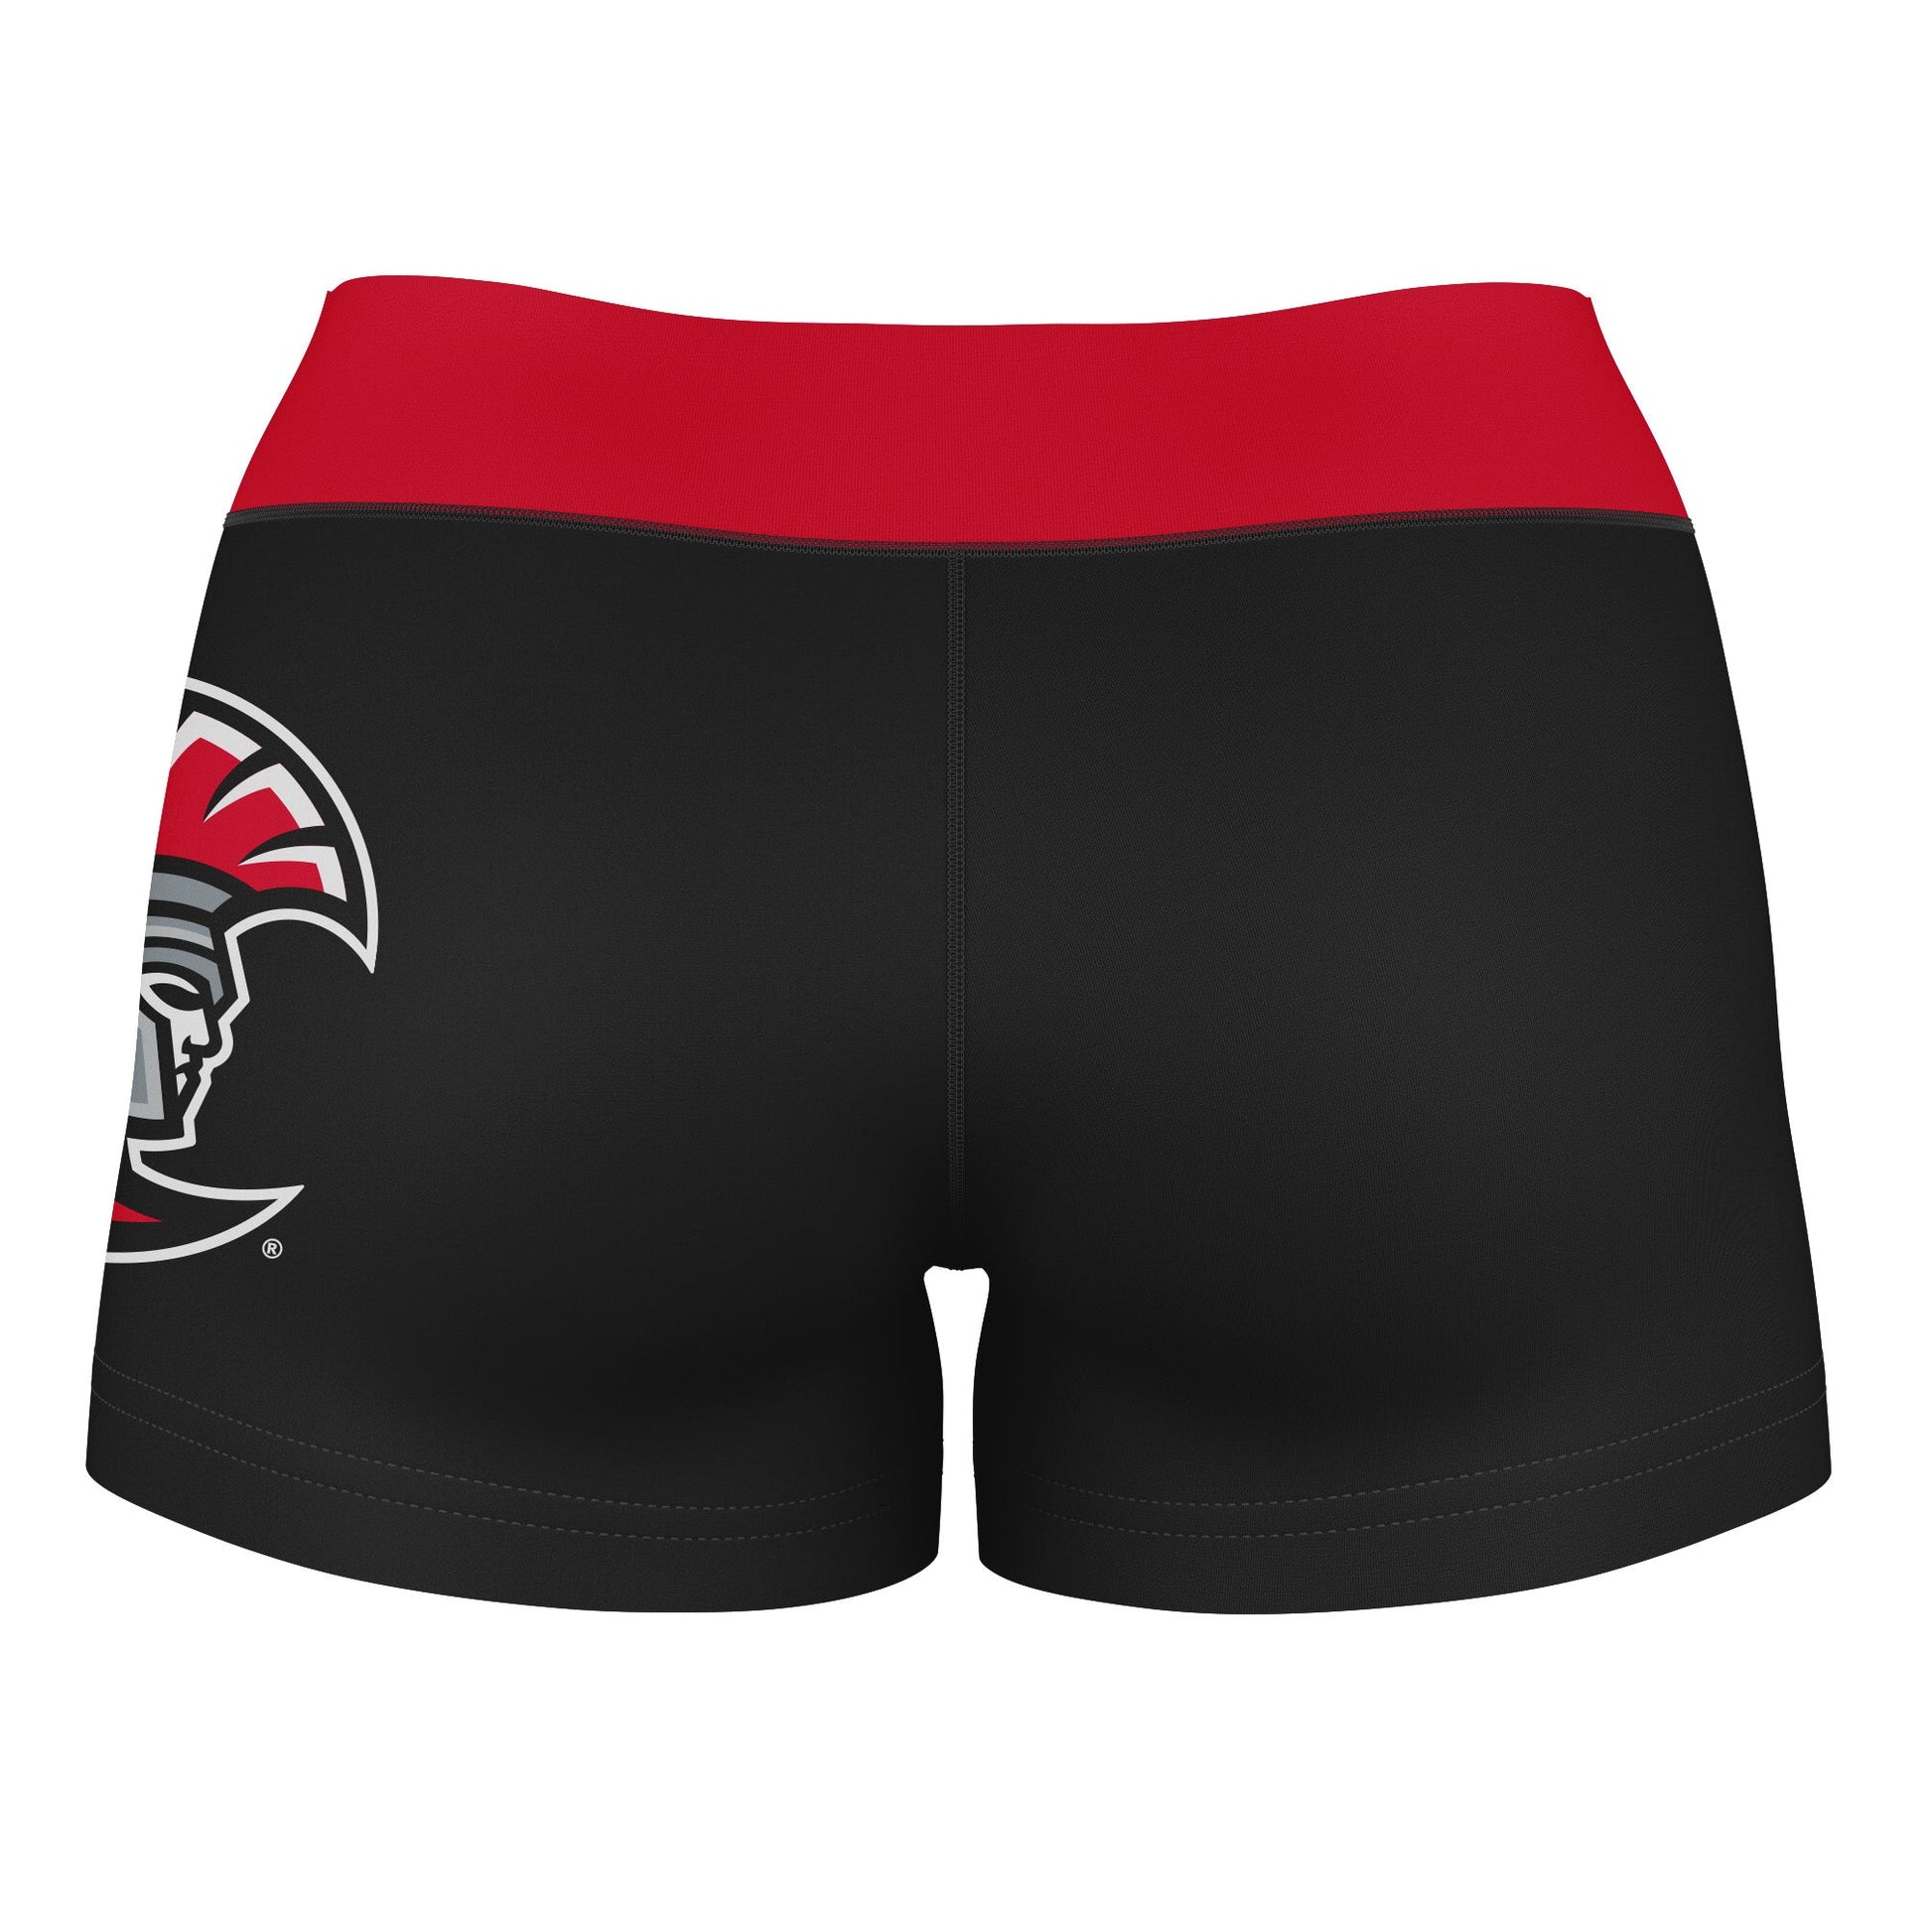 Tampa Spartans Vive La Fete Game Day Logo on Thigh & Waistband Black & Red Women Yoga Booty Workout Shorts 3.75 Inseam" - Vive La F̻te - Online Apparel Store